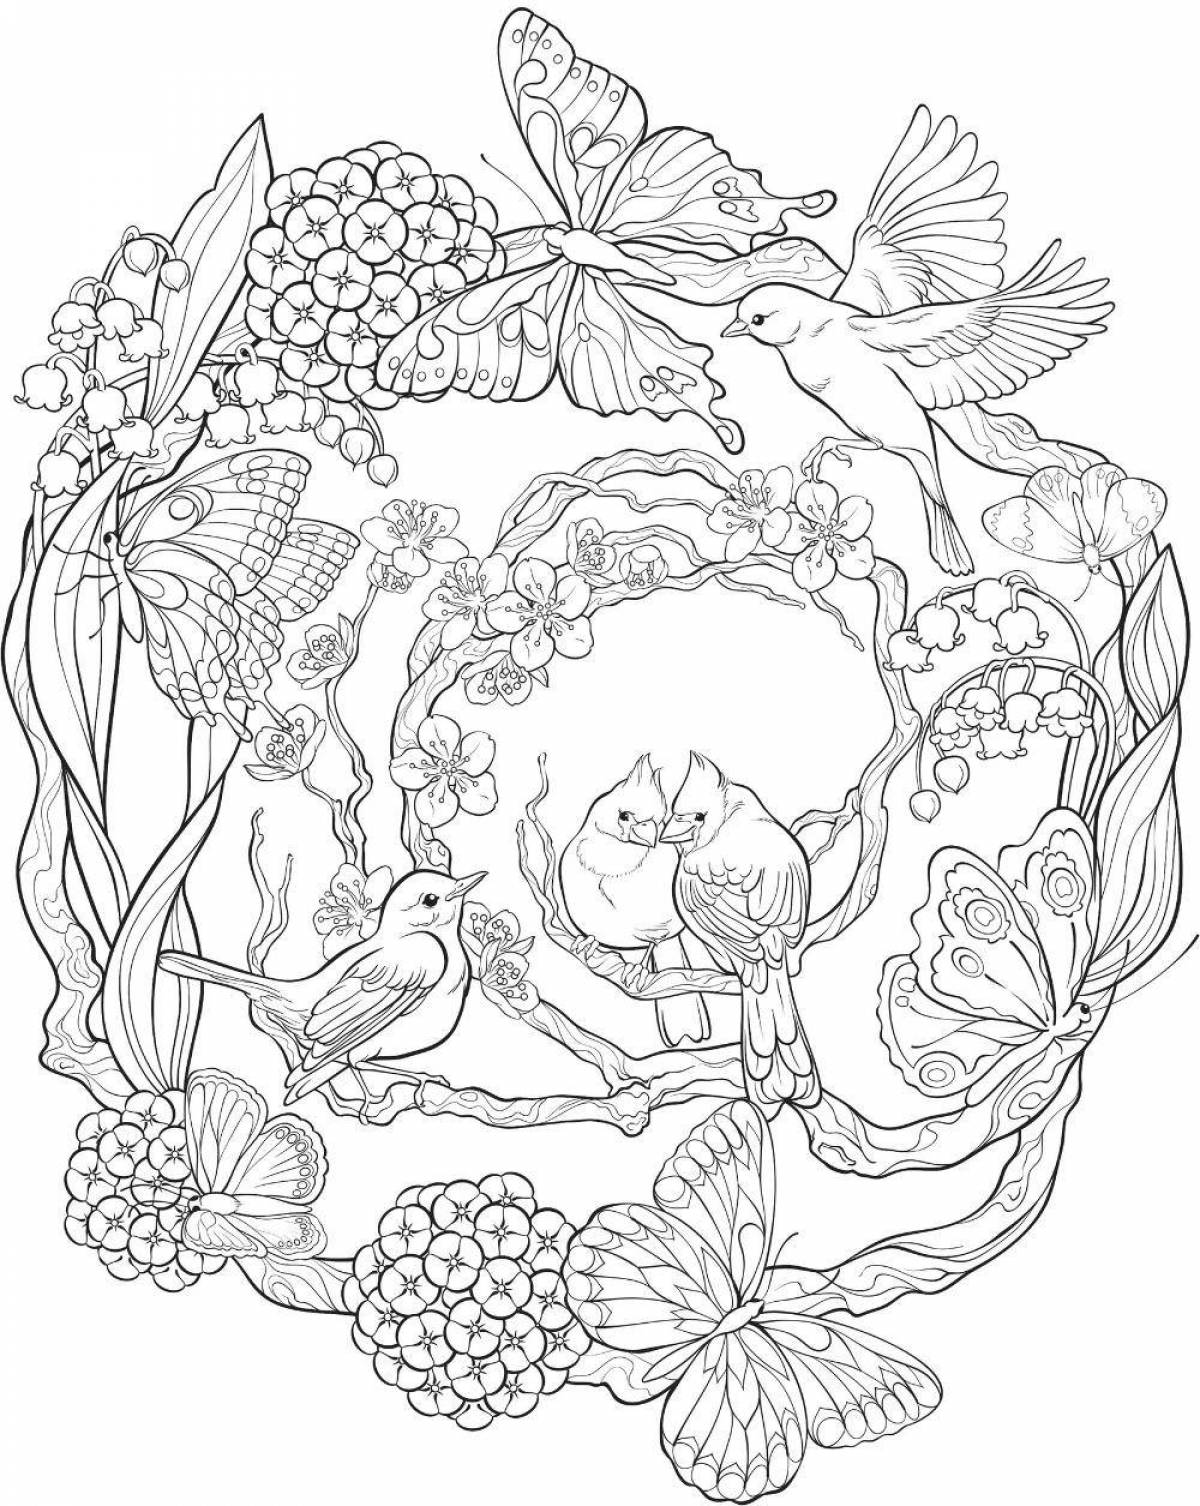 Coloring book soothing nature antistress